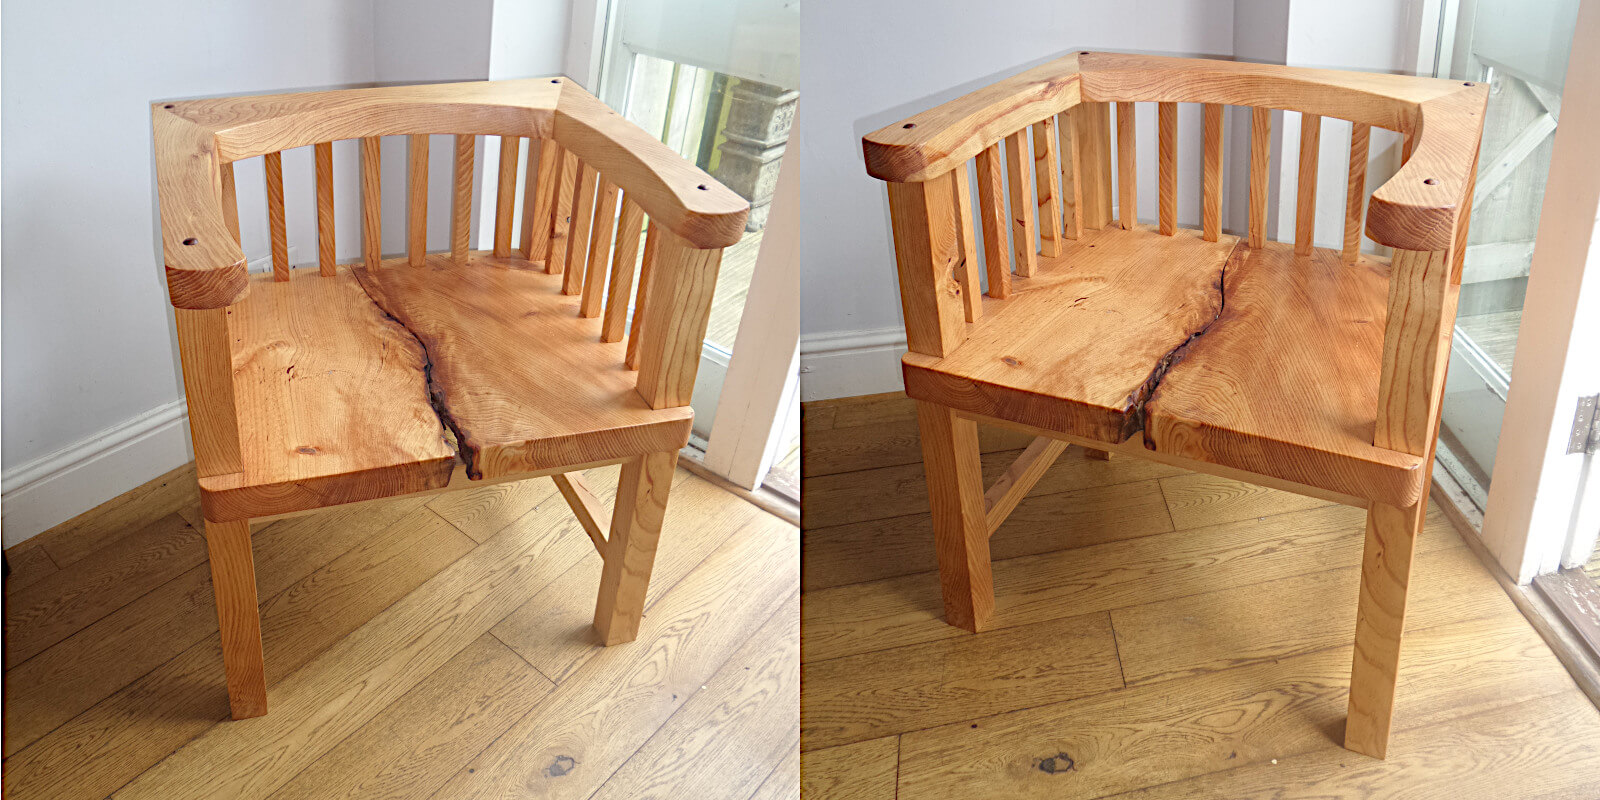 Bespoke Handcrafted Pine Chair